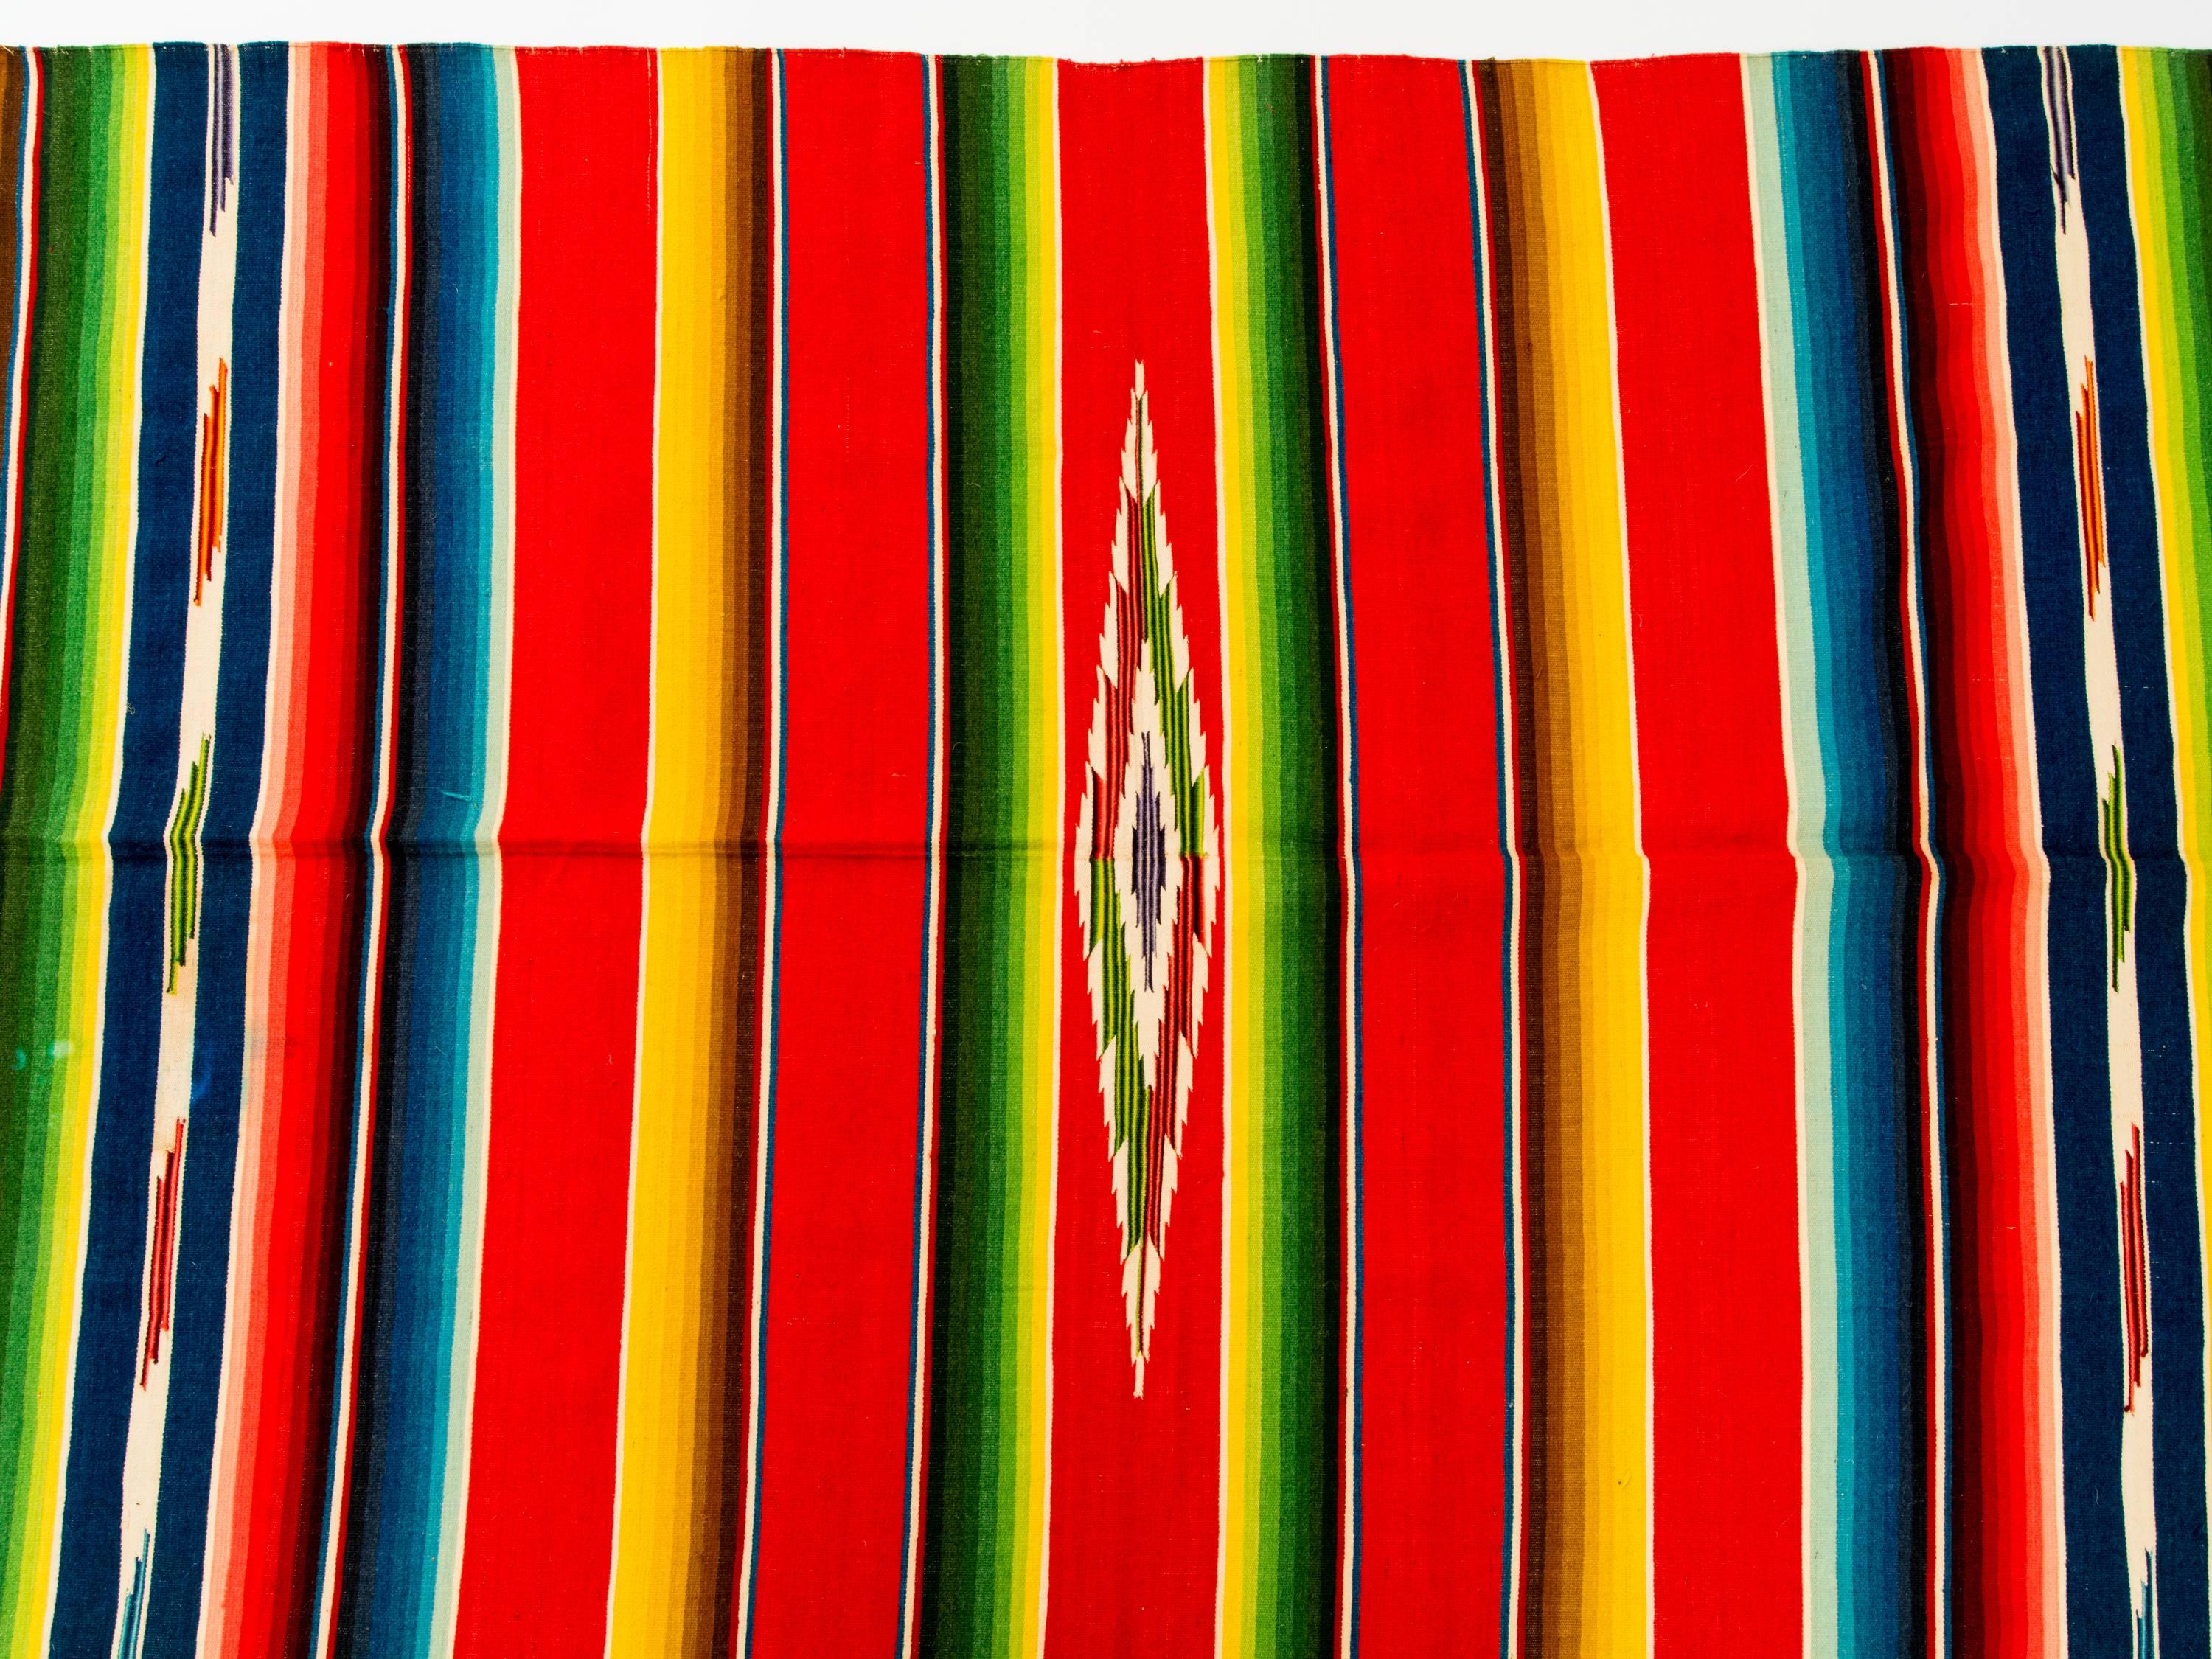 Vintage 1940s Mexican Saltillo serape blanket with multi-color stripe on red background. Serape has fine wool warp, and cotton fringe and weft.